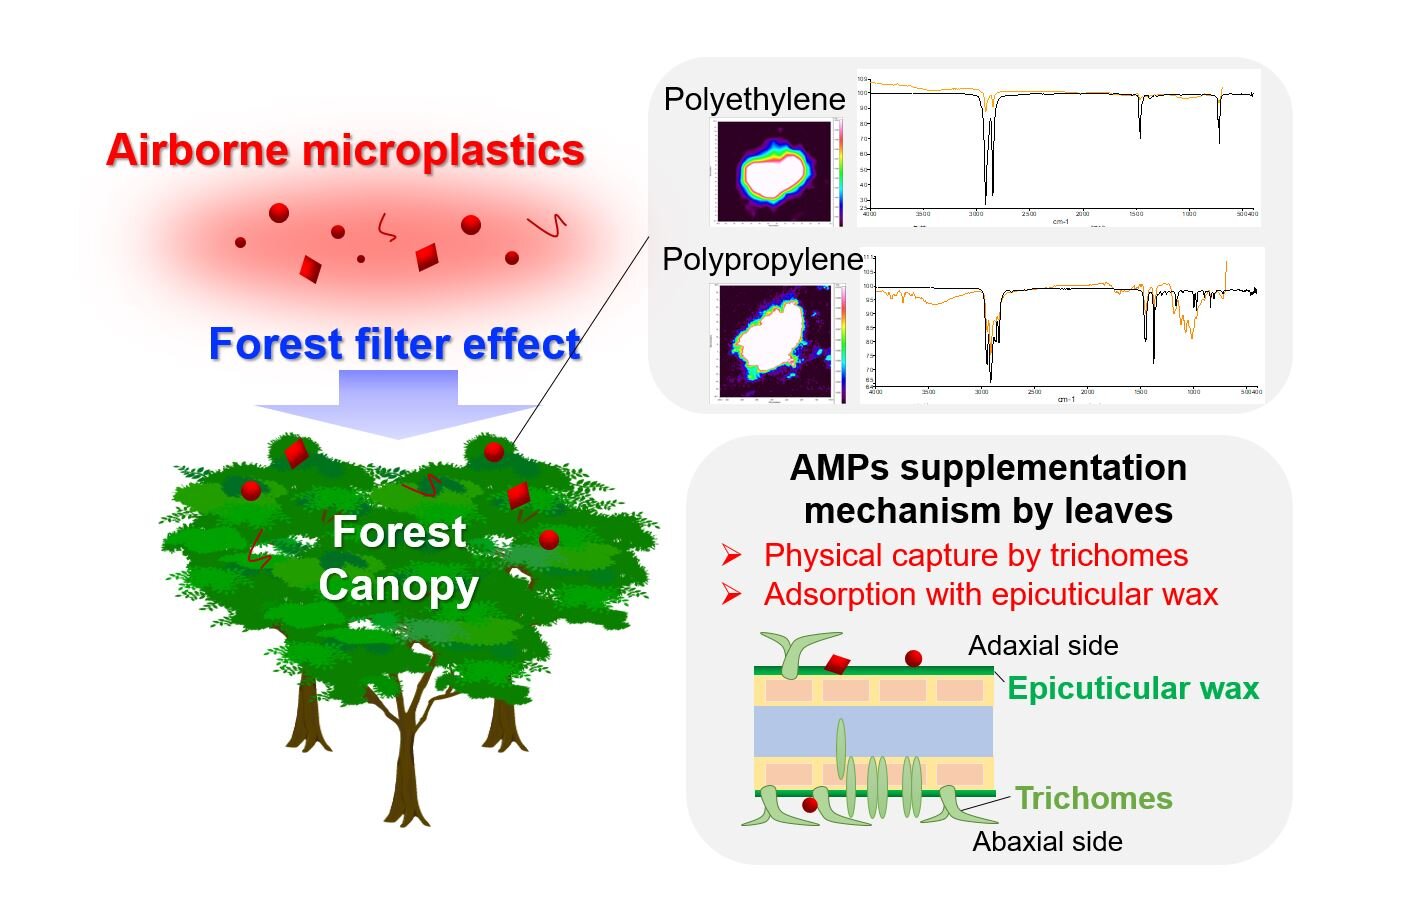 Researchers demonstrate that forests trap airborne microplastics, acting as terrestrial sinks